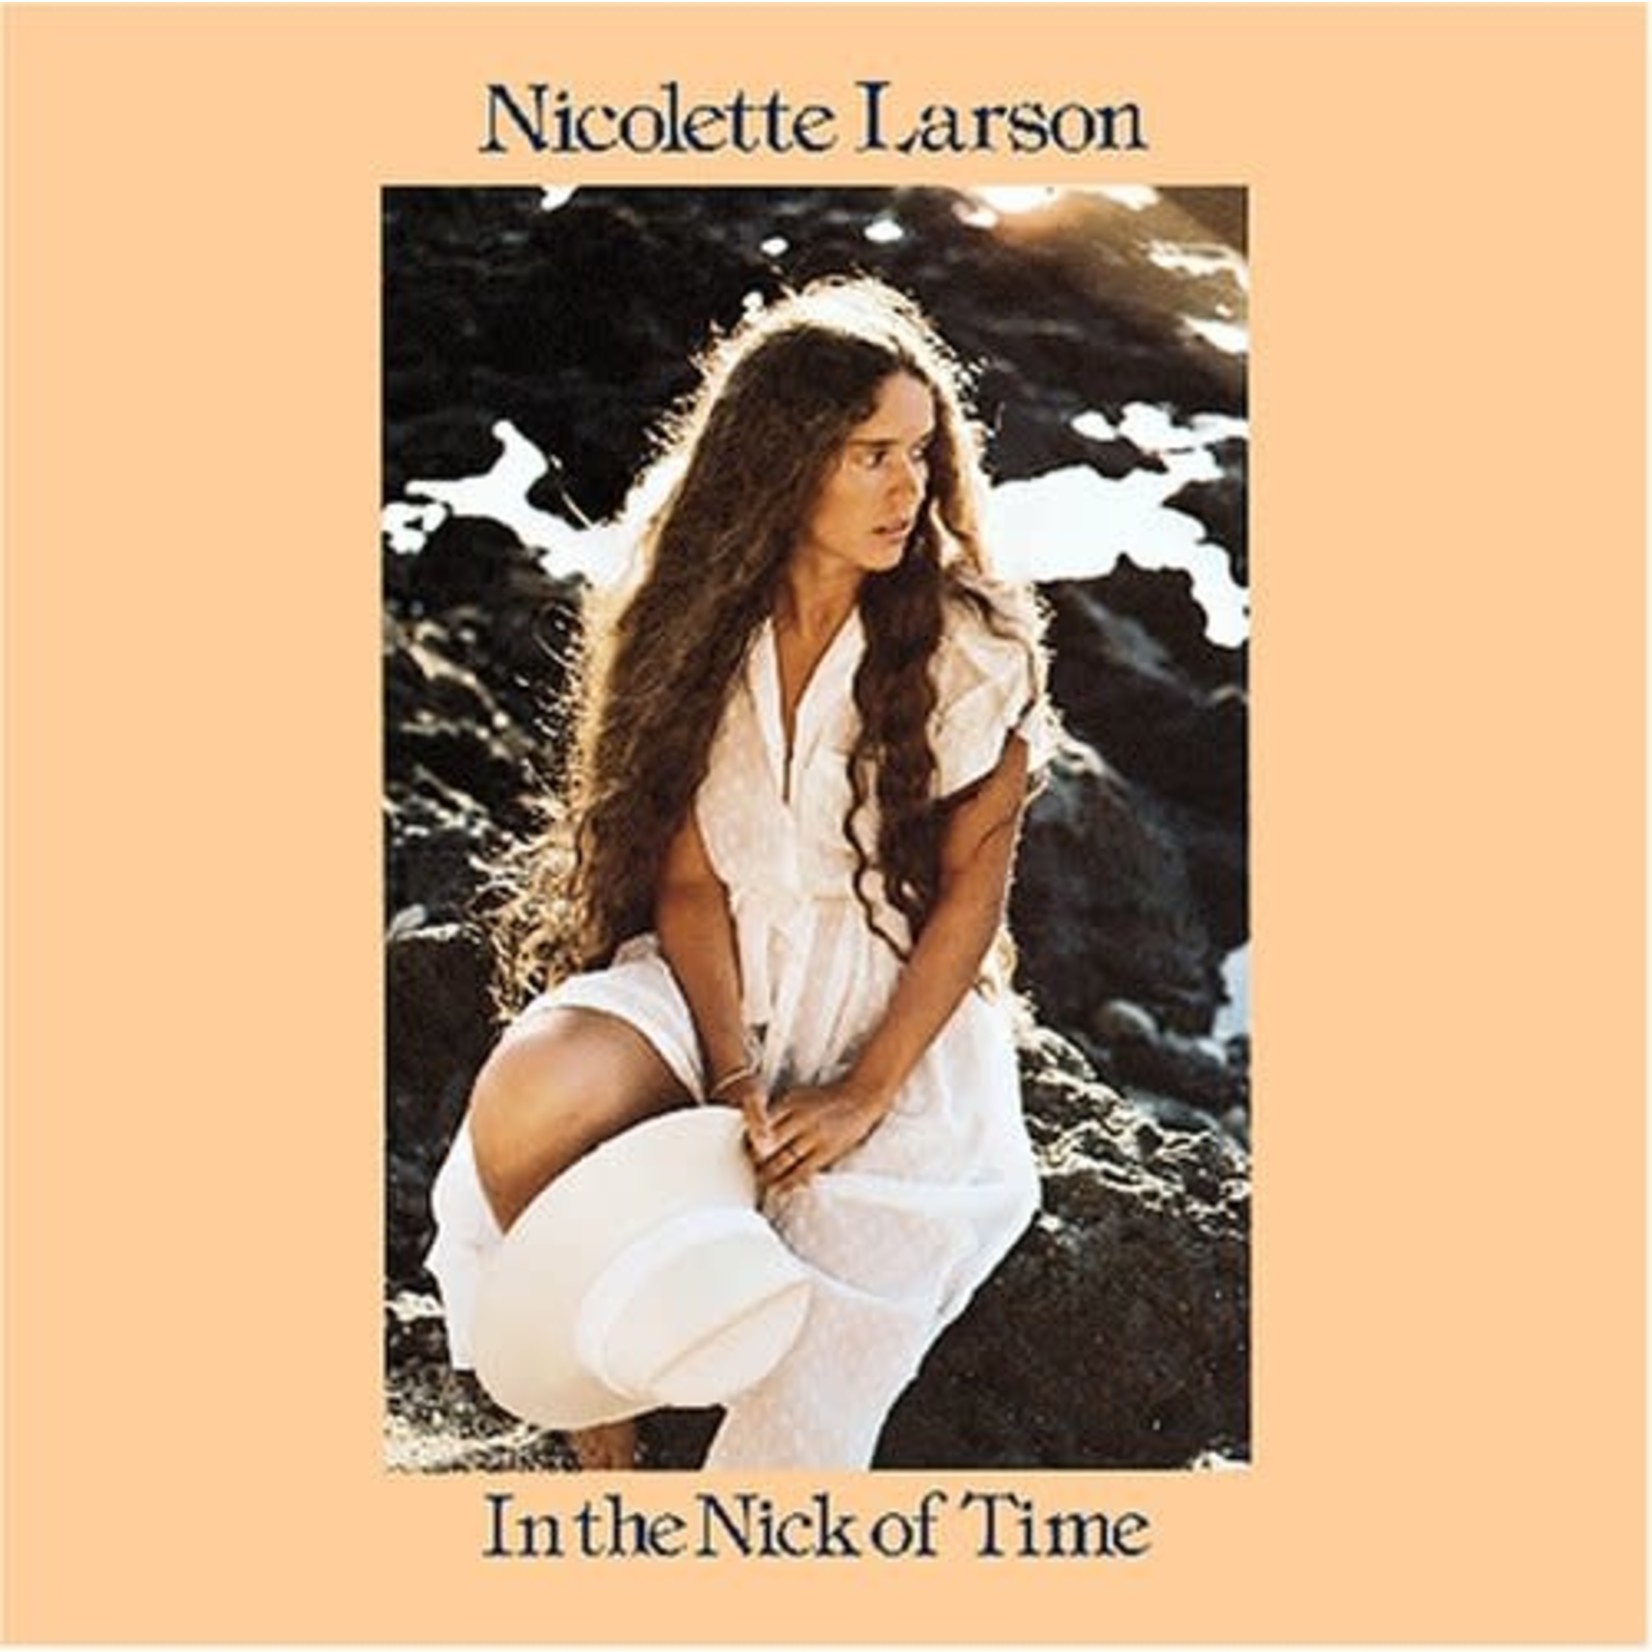 [Vintage] Nicolette Larson - In the Nick of Time